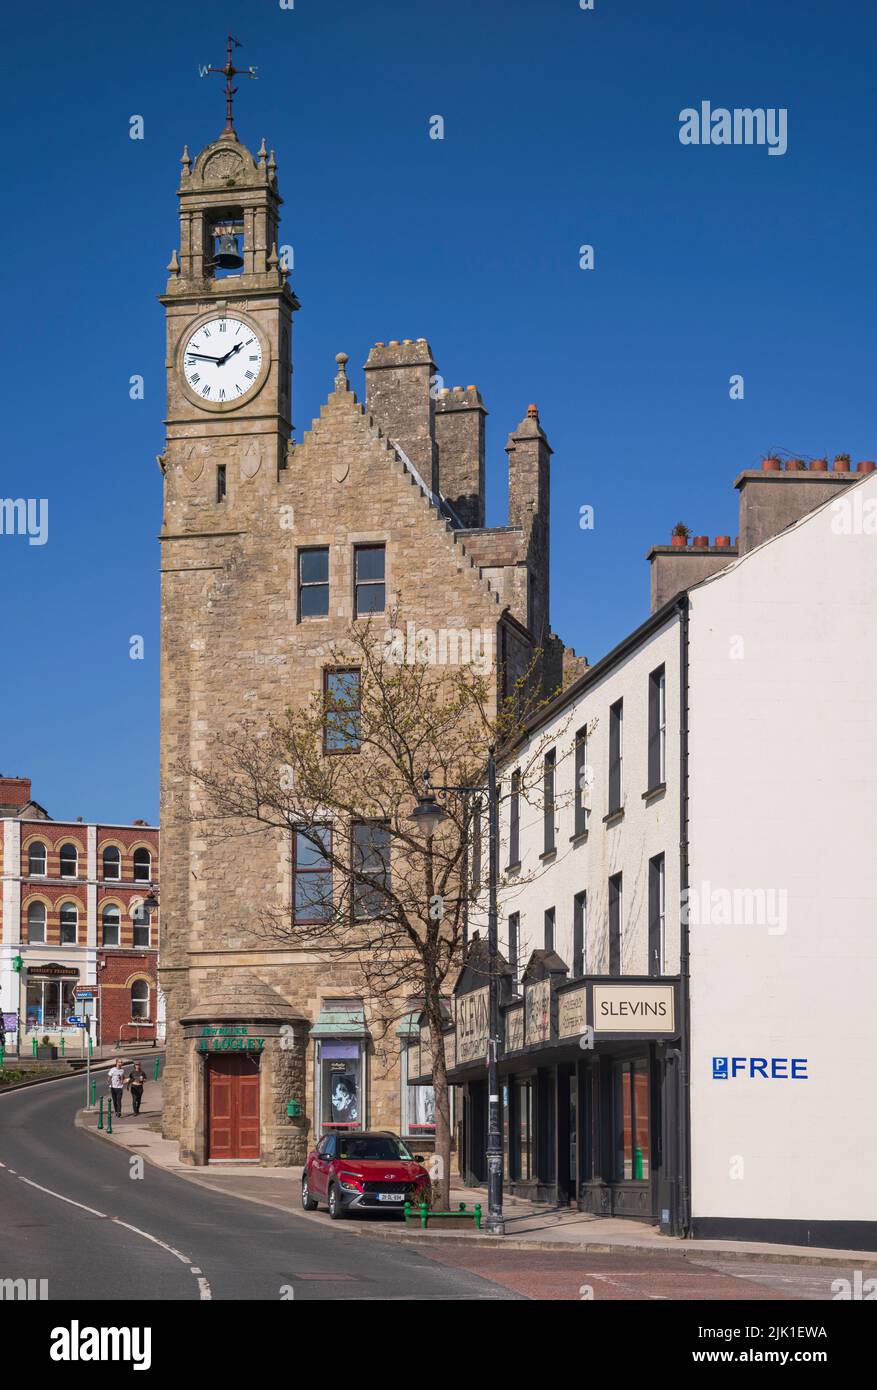 Ireland, County Donegal, Ballyshannon, The Town Clock, Perched at the top of a Scottish style baronial building built in 1878, the tall two-storey clock and bell tower with crow-stepped gables was built for the Belfast Bank who had commenced business in the town in 1869. Stock Photo